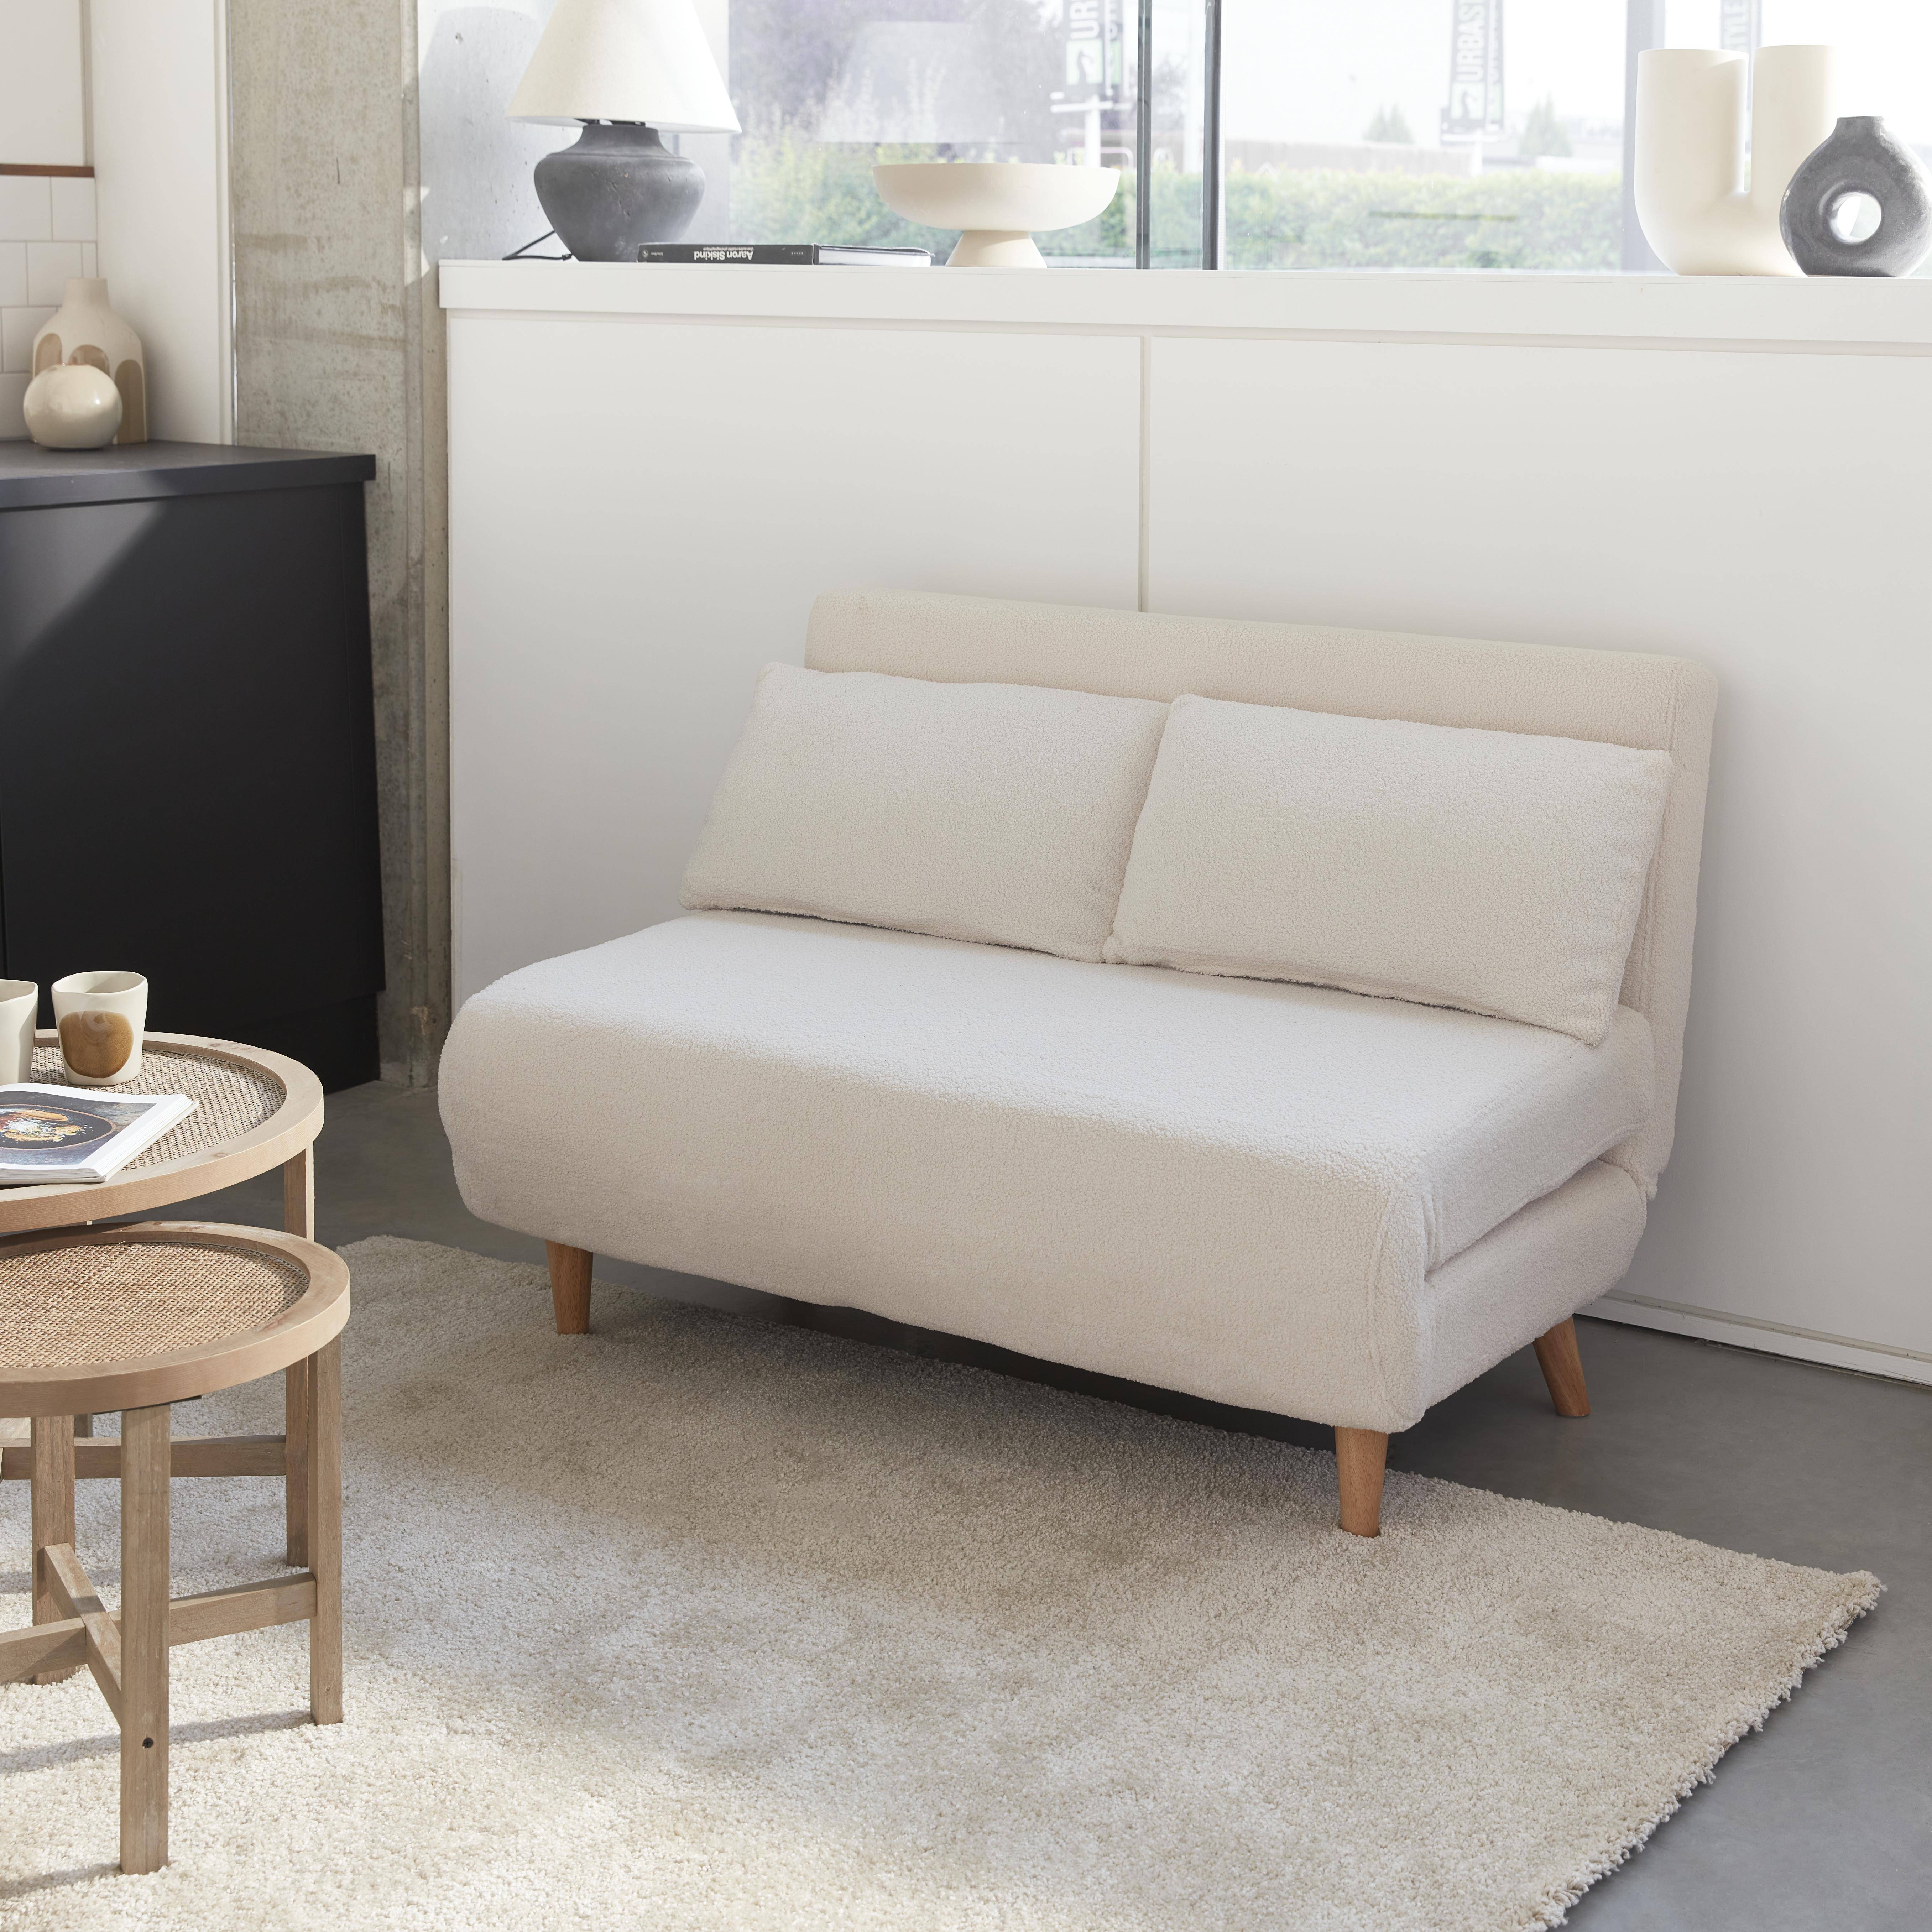 Sleeper, 2-Seater Convertible Sofa with Wooden Legs,  L120xW81xH82cm, white bouclette,sweeek,Photo1